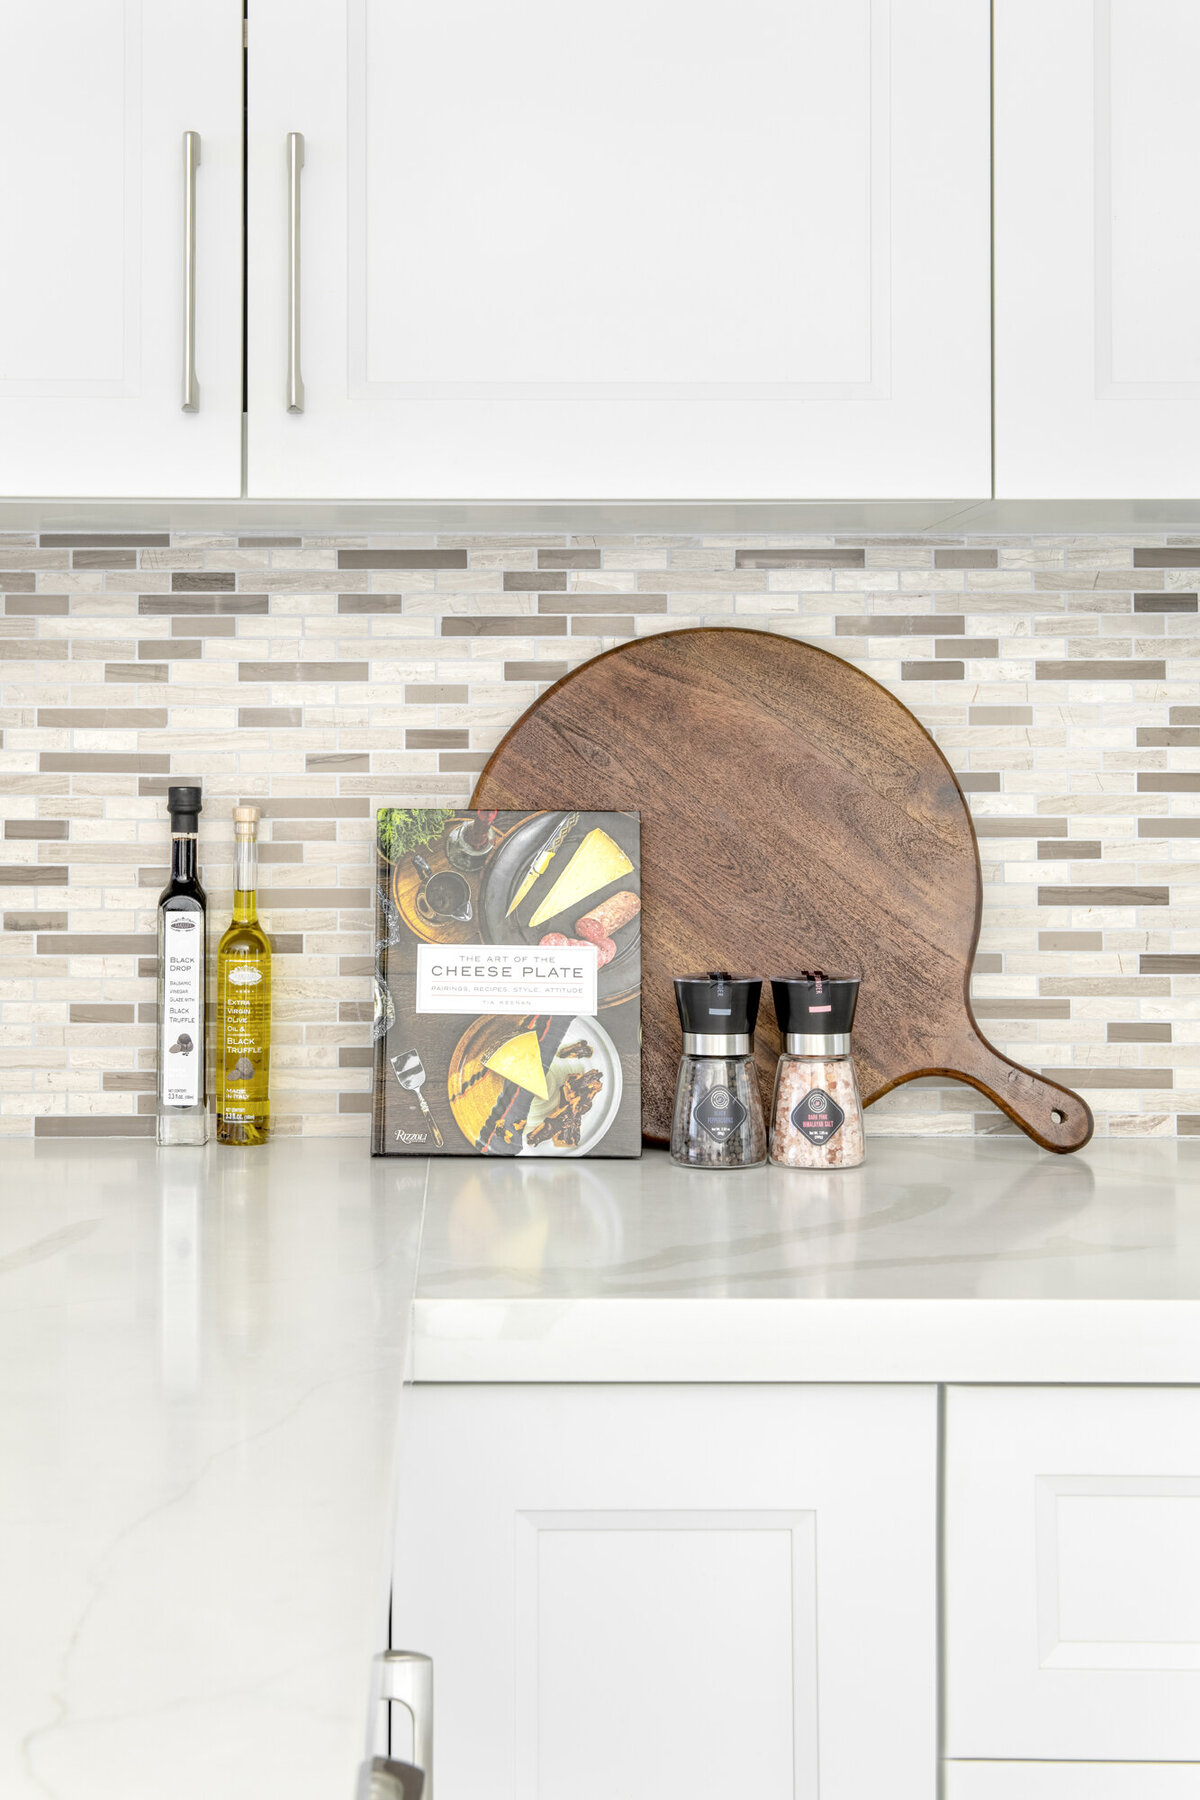 Simple yet Stylish Kitchen Countertop Styling by S. Fl based SOL Y MAR INTERIORS